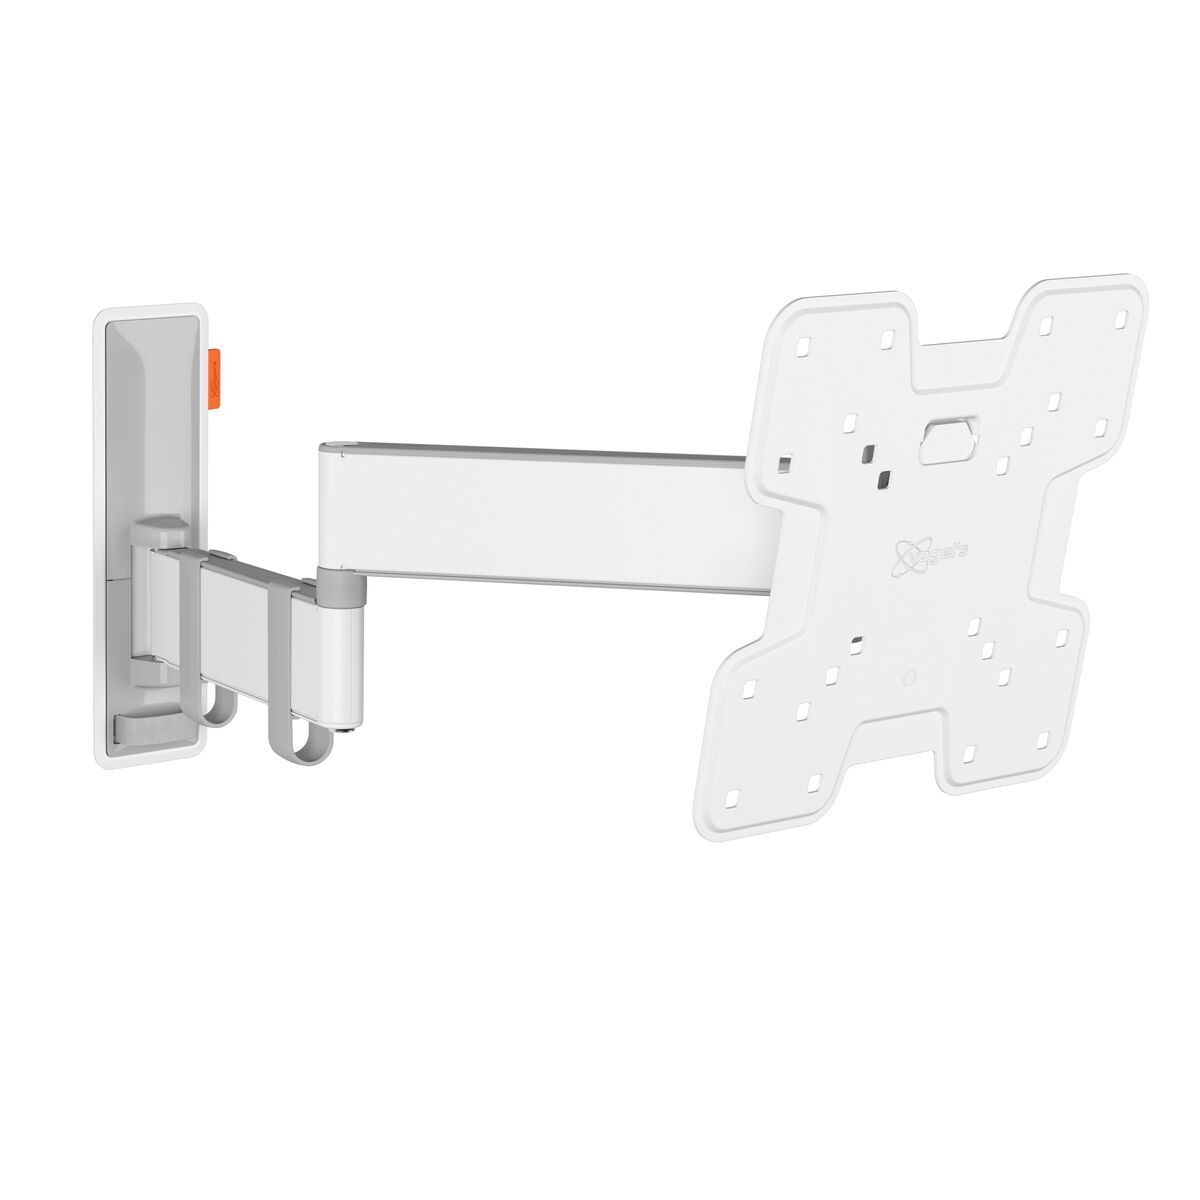 Vogel's TVM 3243 Full-Motion TV Wall Mount (white) - Suitable for 19 up to 43 inch TVs - Full motion (up to 180°) swivel - Tilt up to 20° - Product